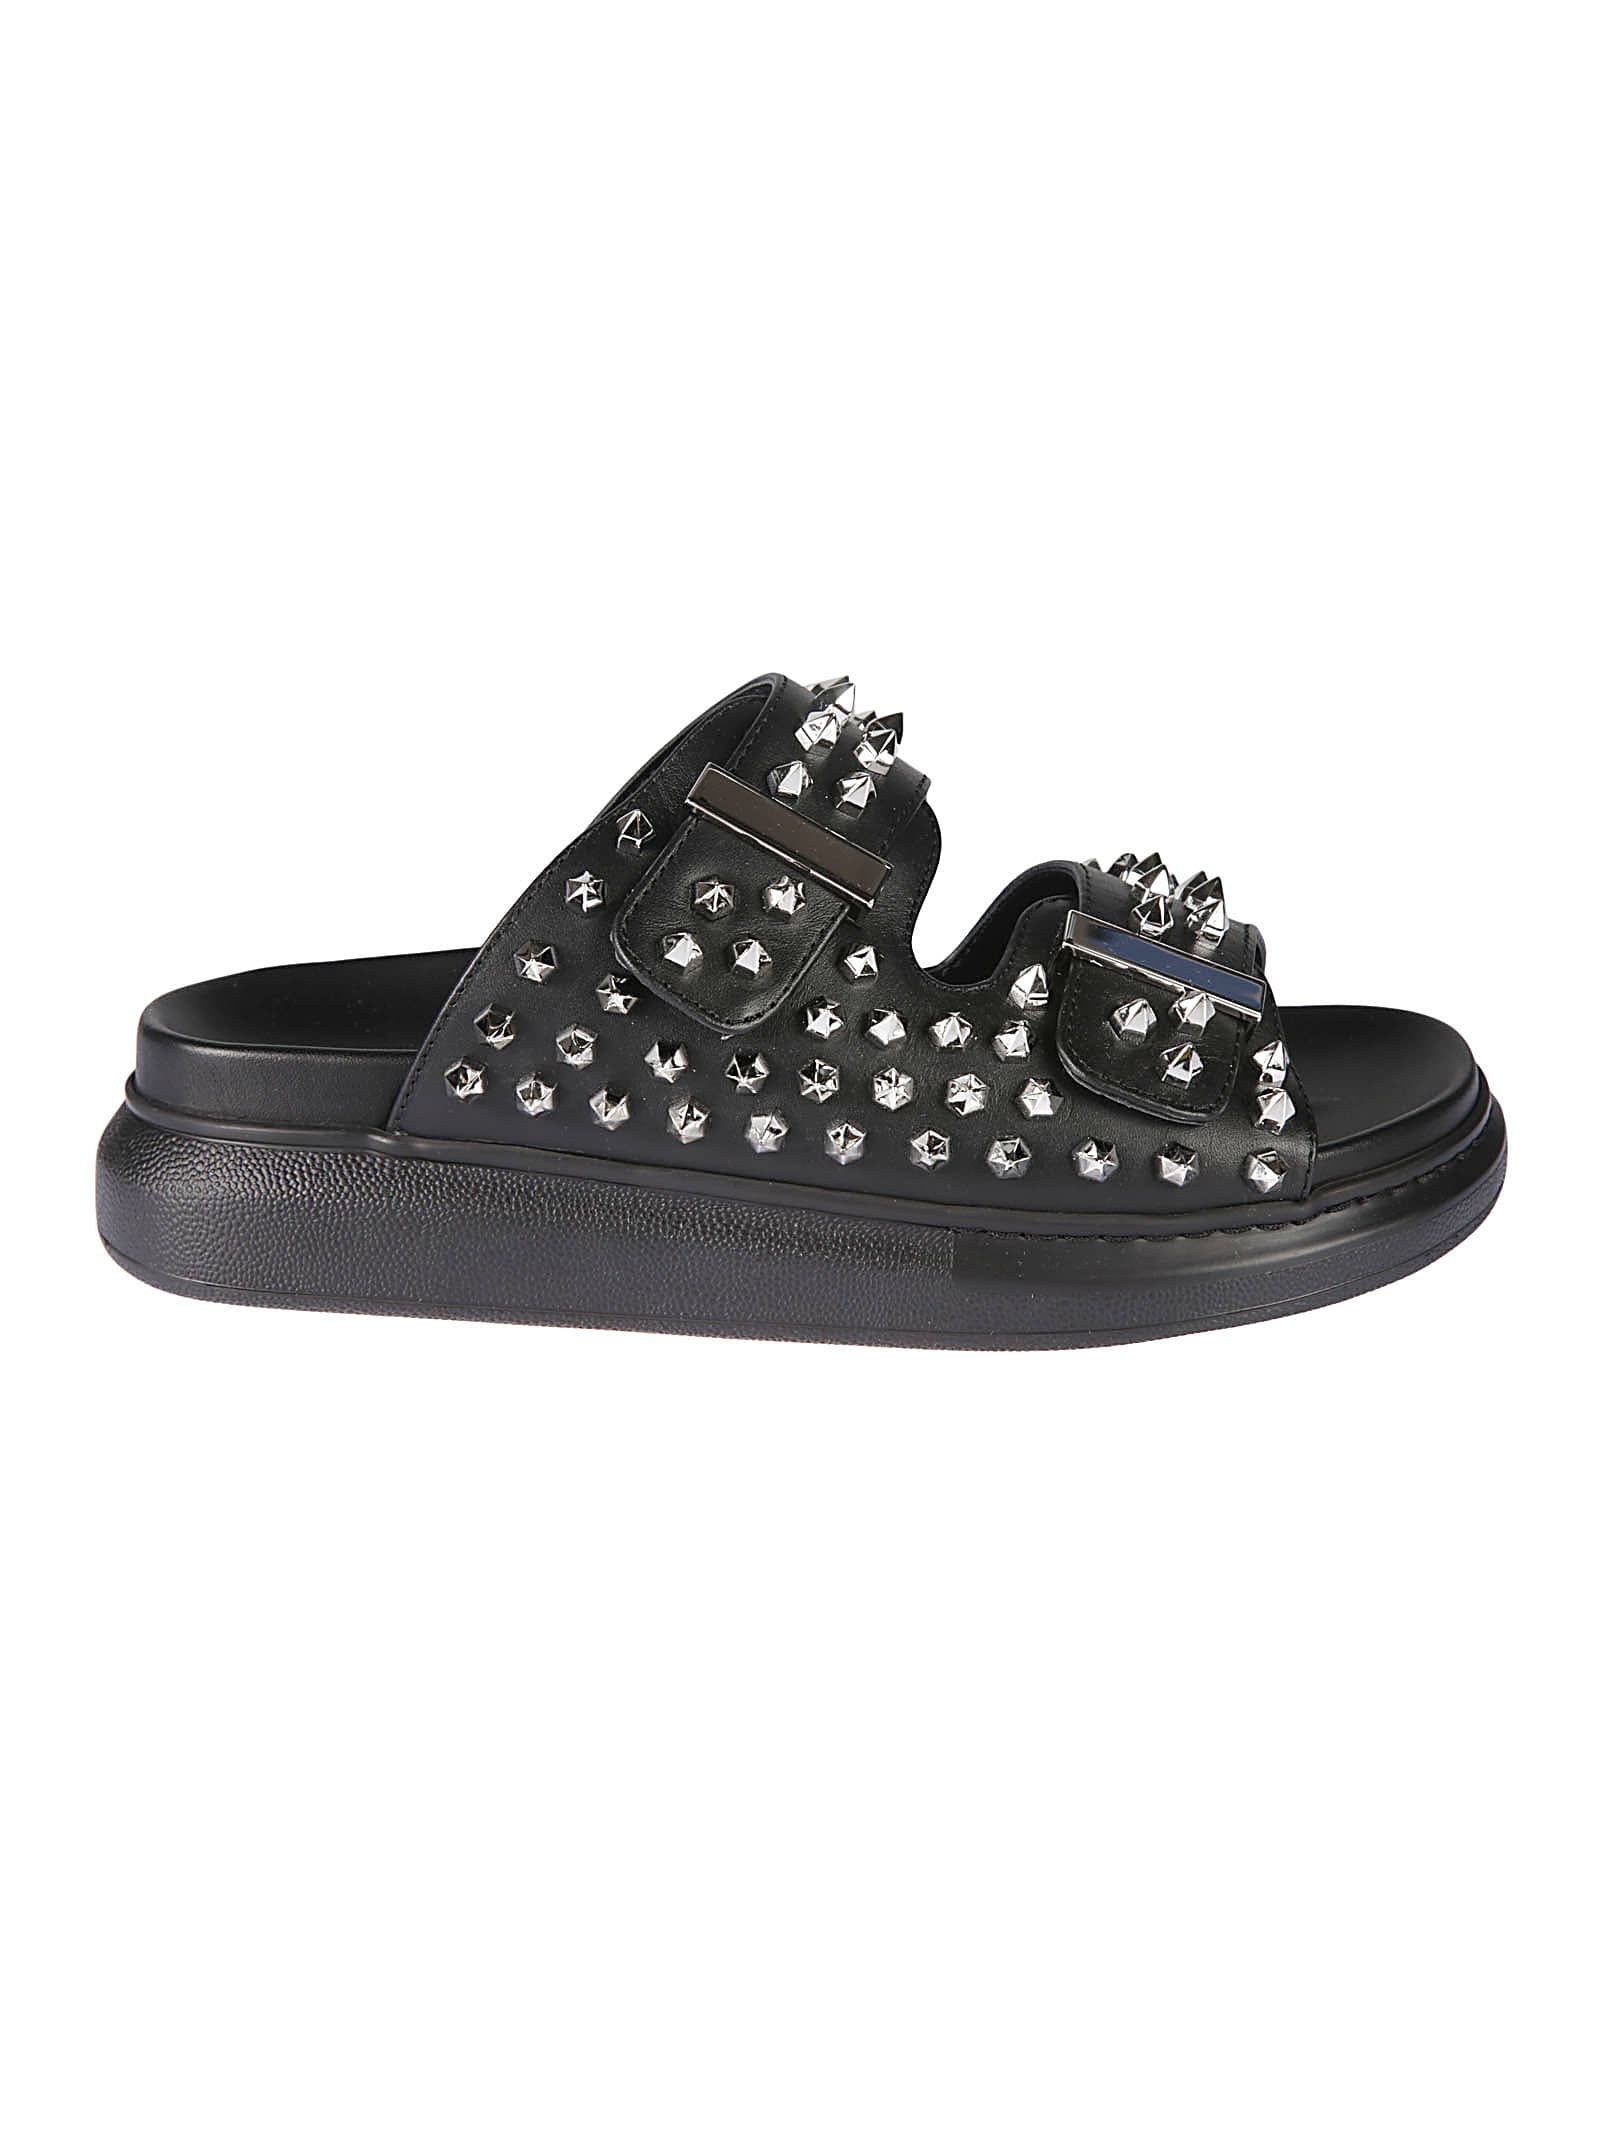 Buy Alexander McQueen Studded Sandals online, shop Alexander McQueen shoes with free shipping